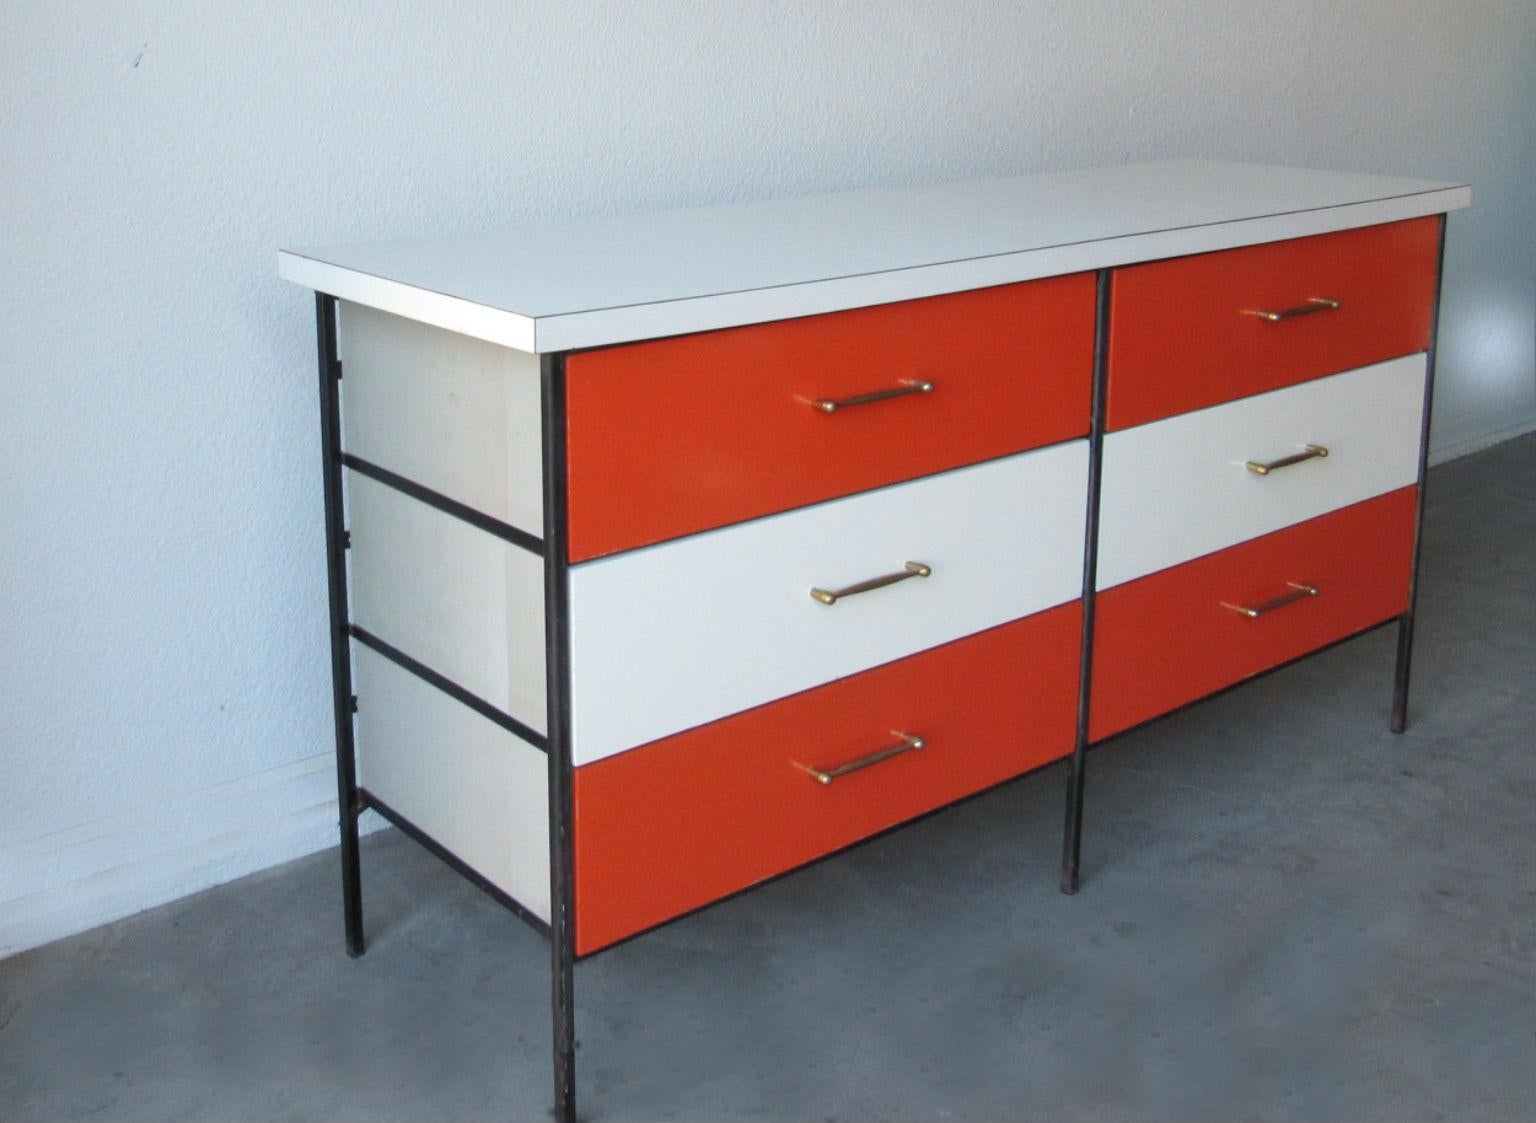 Chest of drawers by D.R. Bates and Jackson Gregory for Vista of California, 1950s. Wrought iron skeleton frame, multicolored drawer fronts in vivid orange and white, white laminate top and brass pulls. In very good original condition.
  